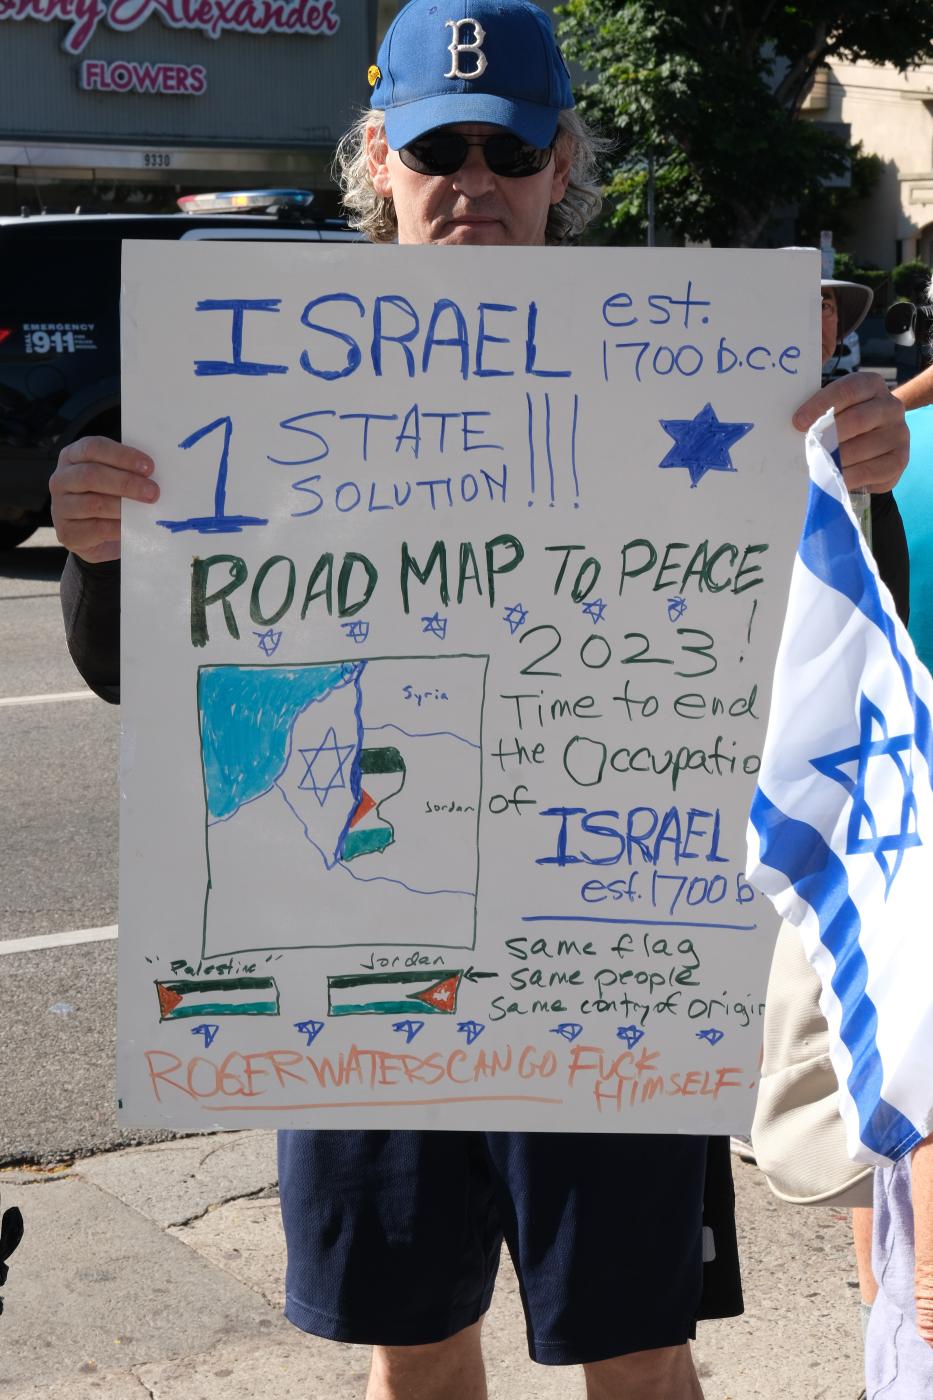 Solidarity March for Israel in Los Angeles  | Buy this image